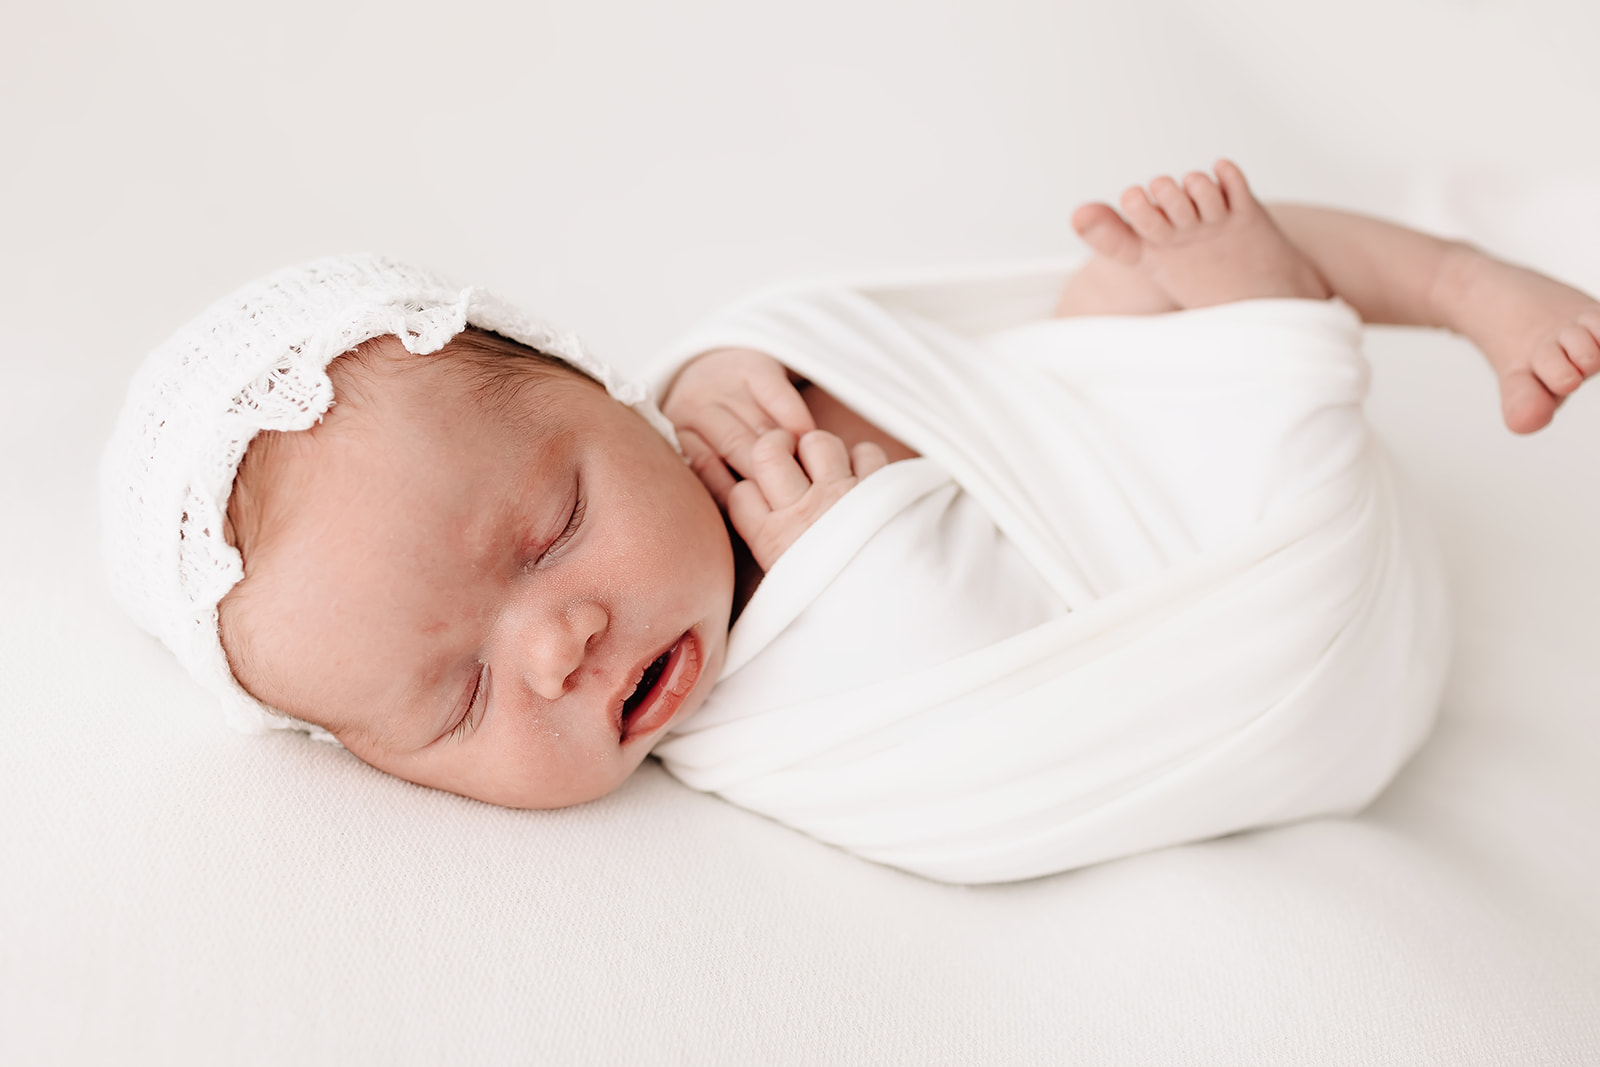 A newborn baby sleeps wrapped up in a white swaddle and lace bonnet Happy Up Inc